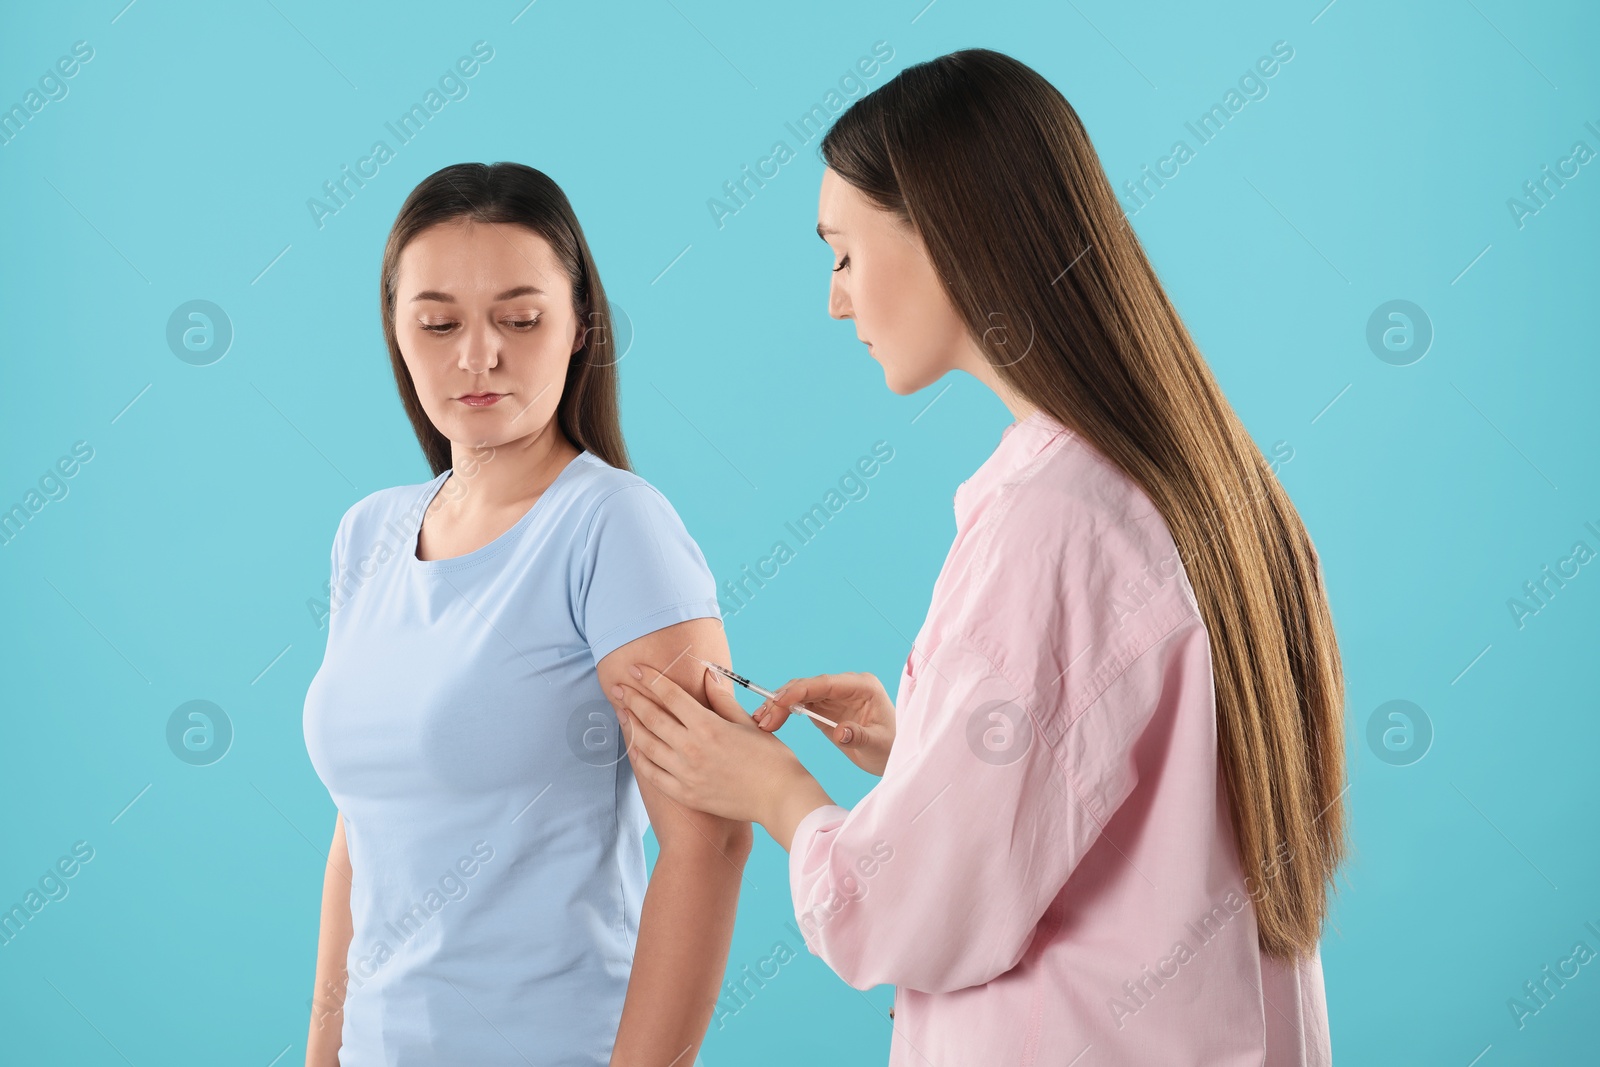 Photo of Woman giving insulin injection to her diabetic friend on light blue background